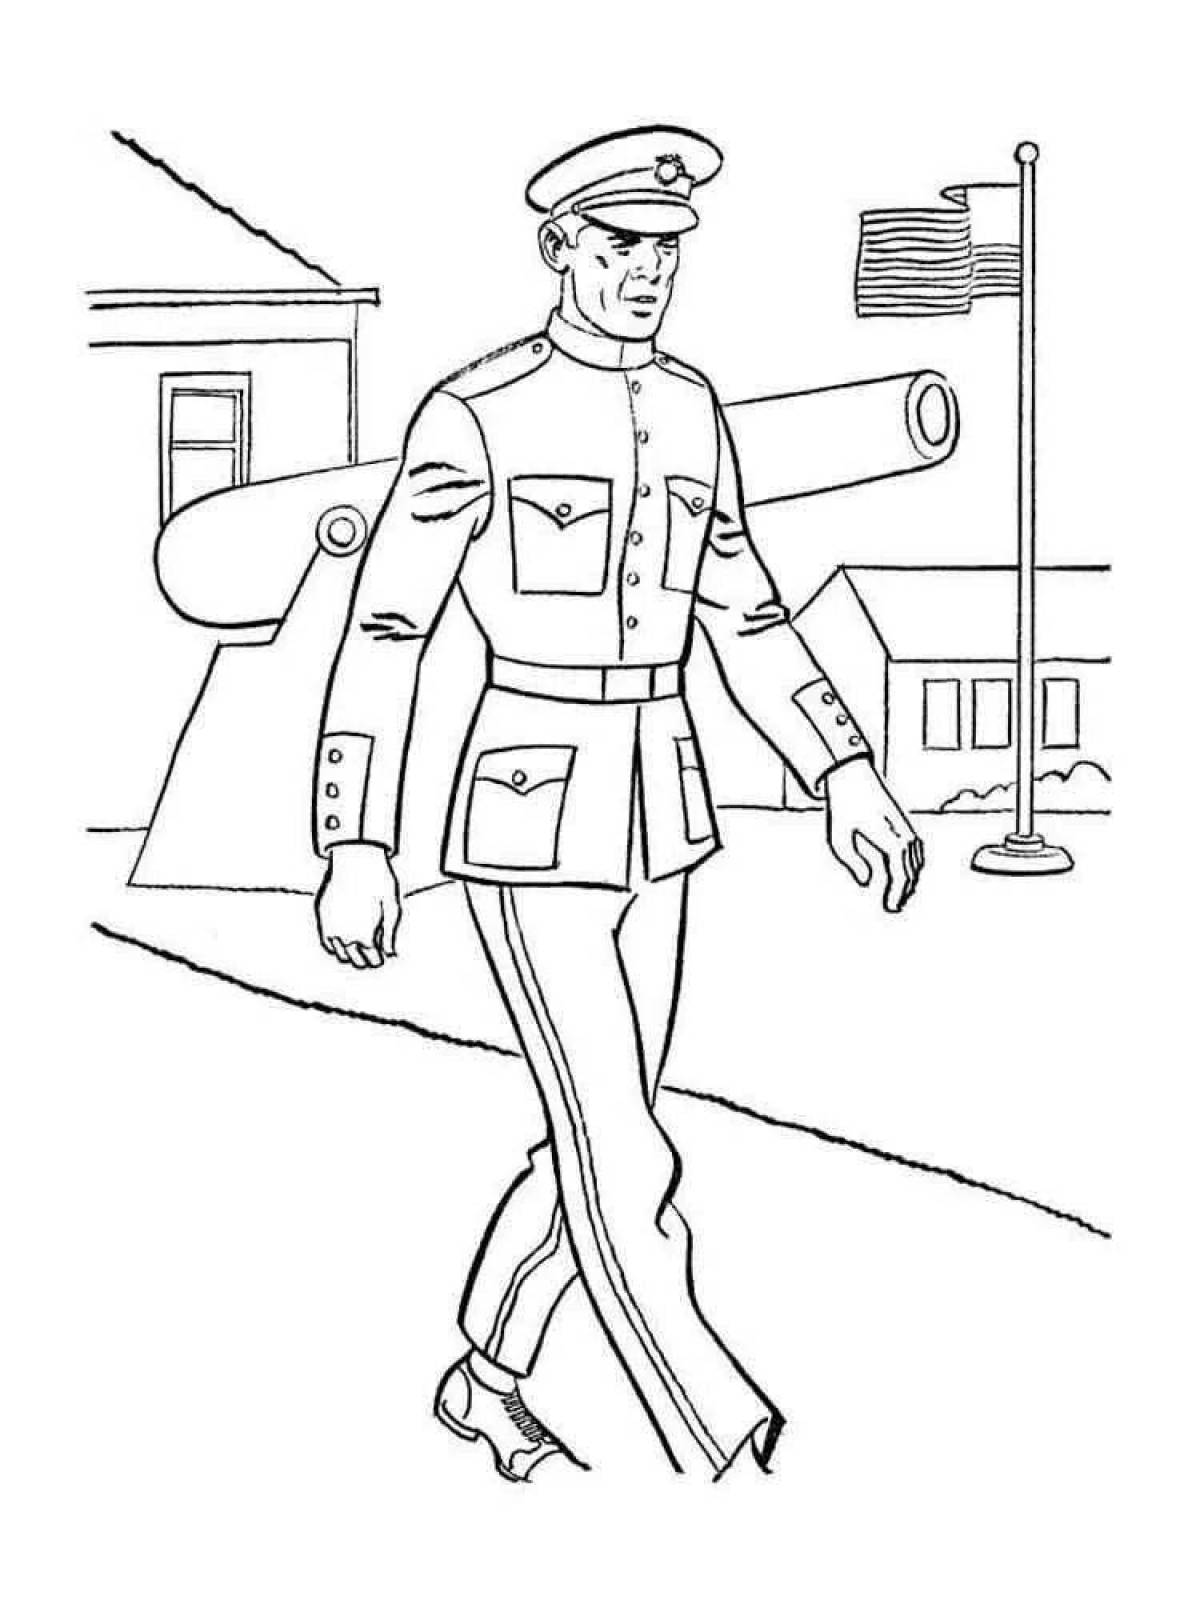 Glorious soldier on duty drawing